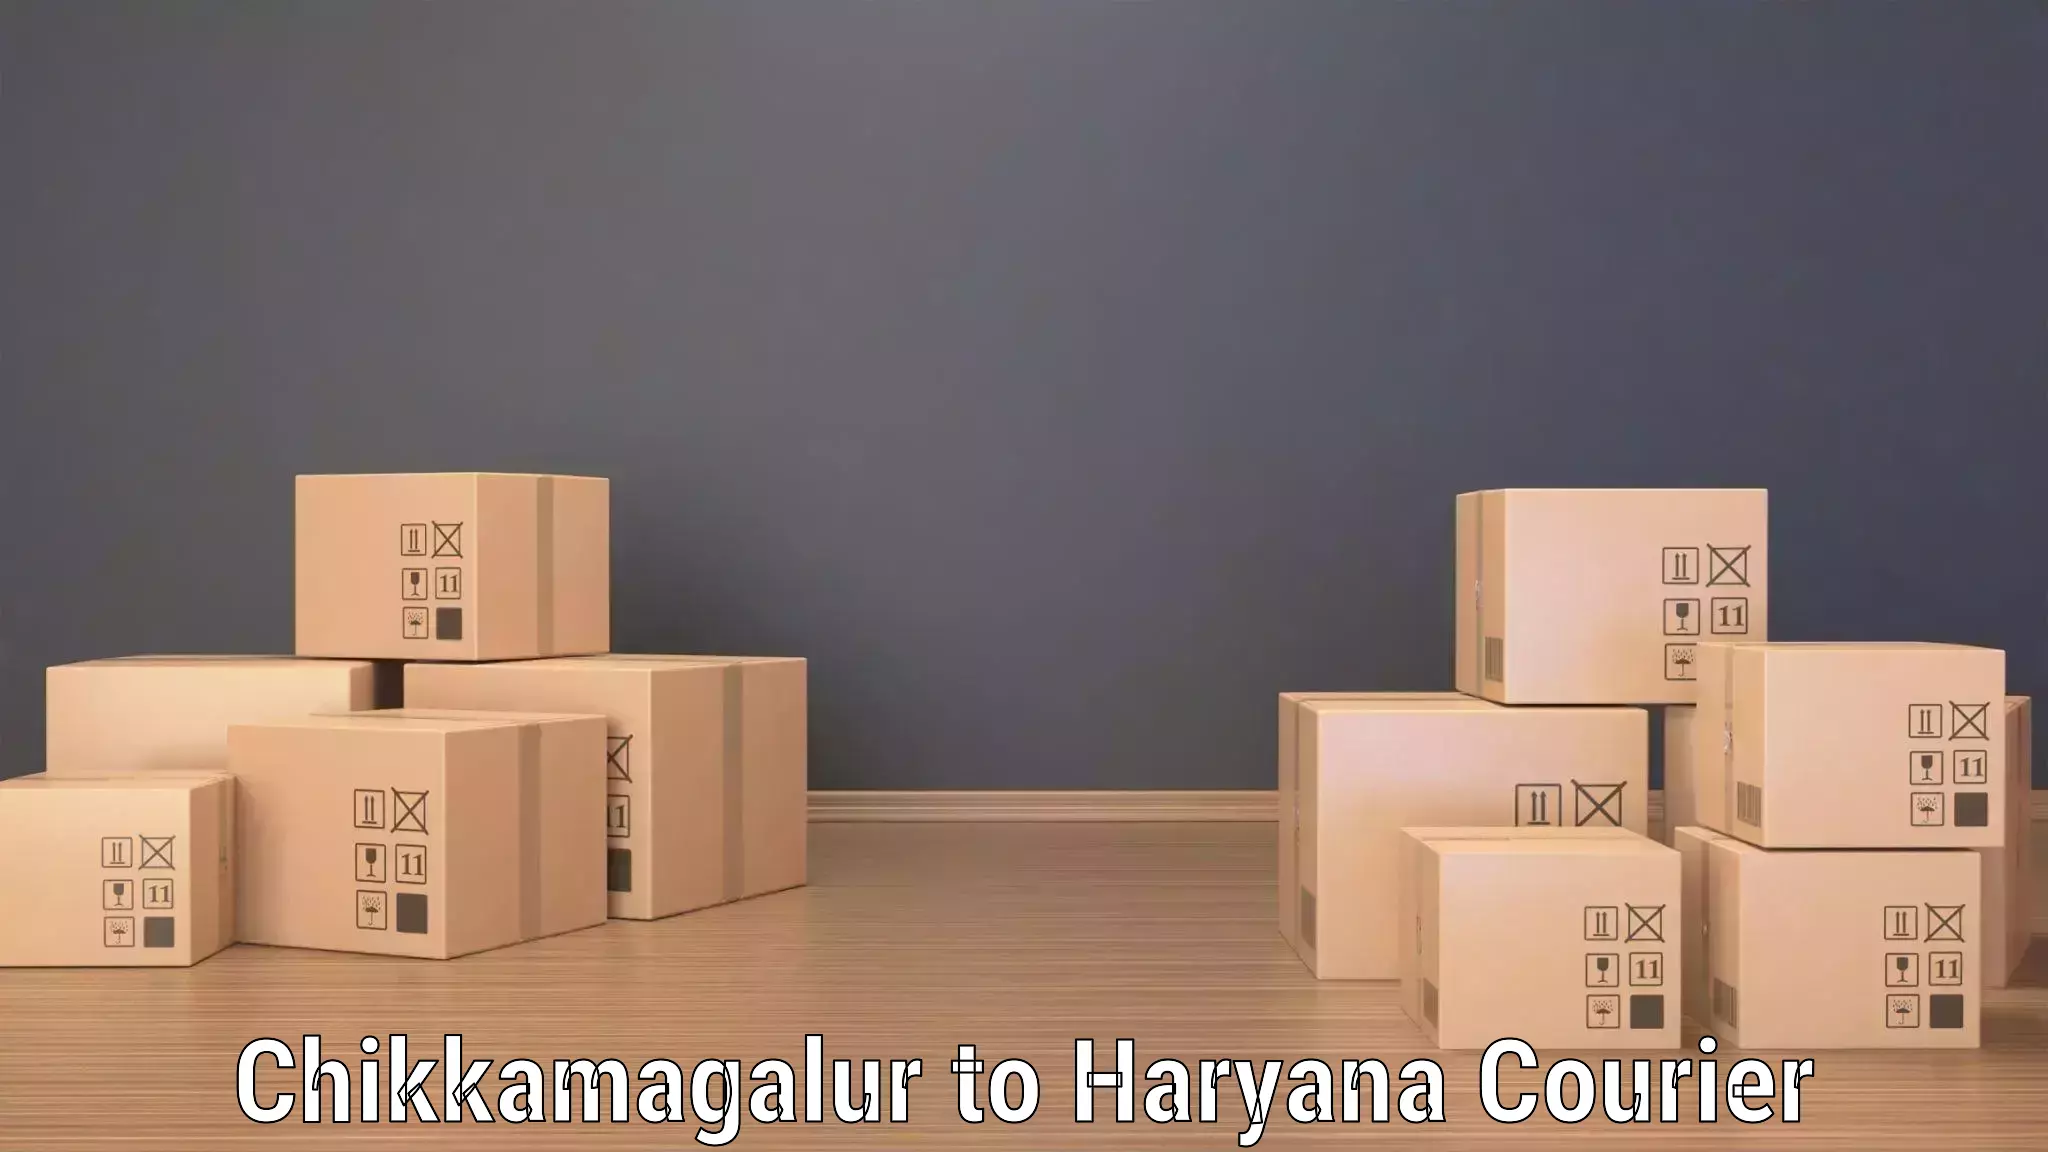 Personalized courier experiences Chikkamagalur to IIIT Sonepat